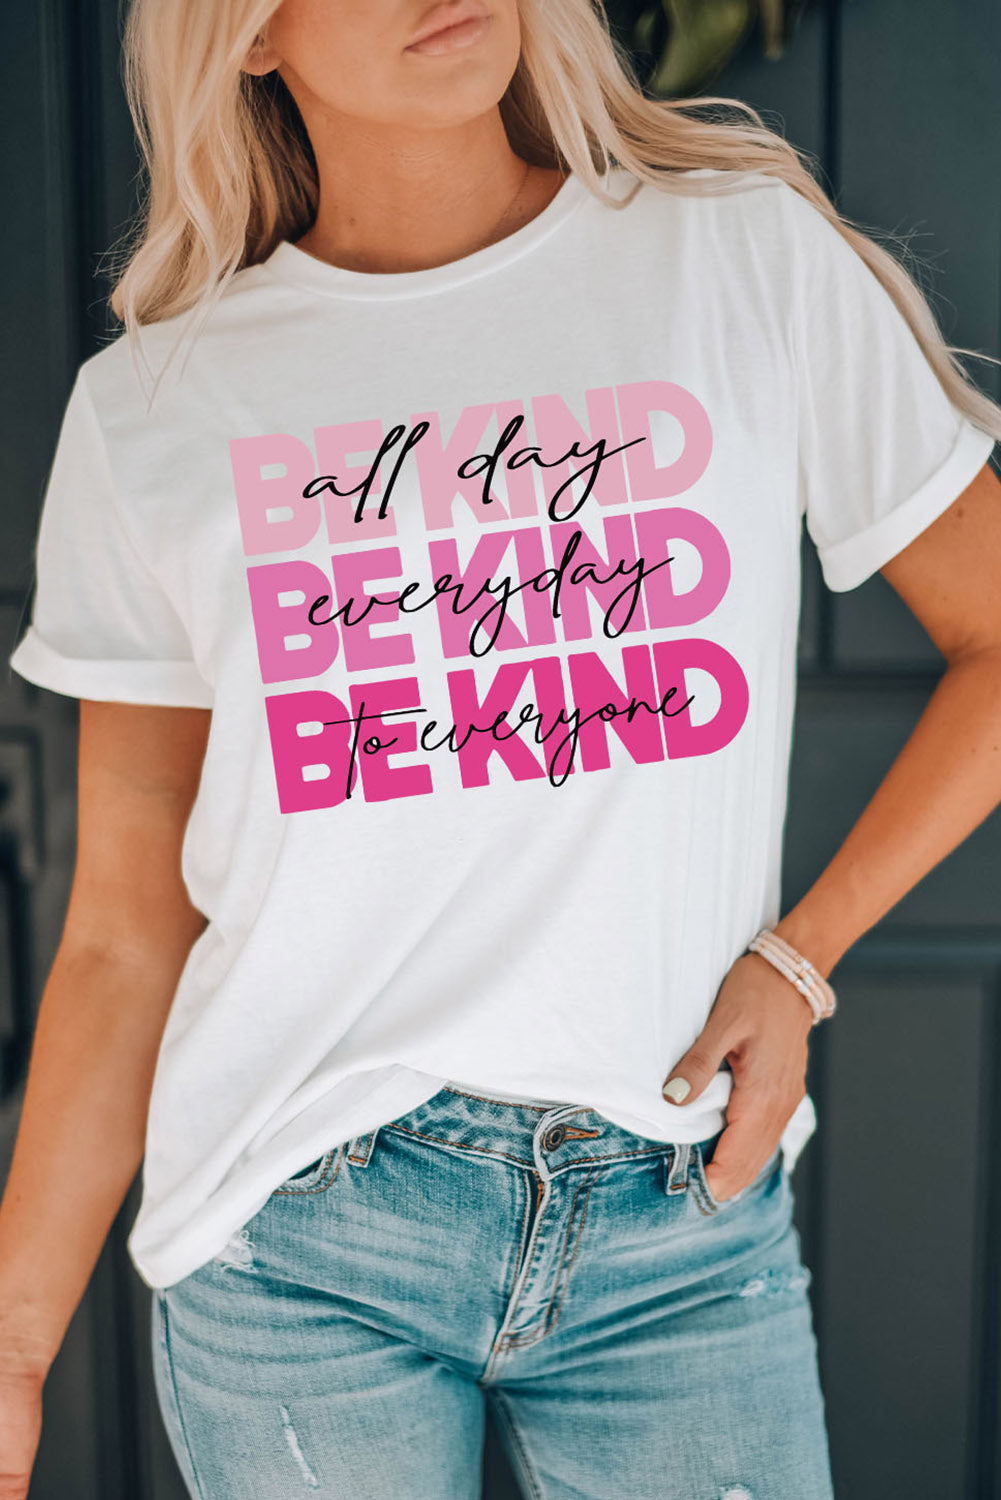 Womens Misses Be Kind All Day Everyday To Everyone Graphic Tee in Pink Graphic Design on White Short Sleeve T-Shirt Black Script Font and Pink Bold Block letter font